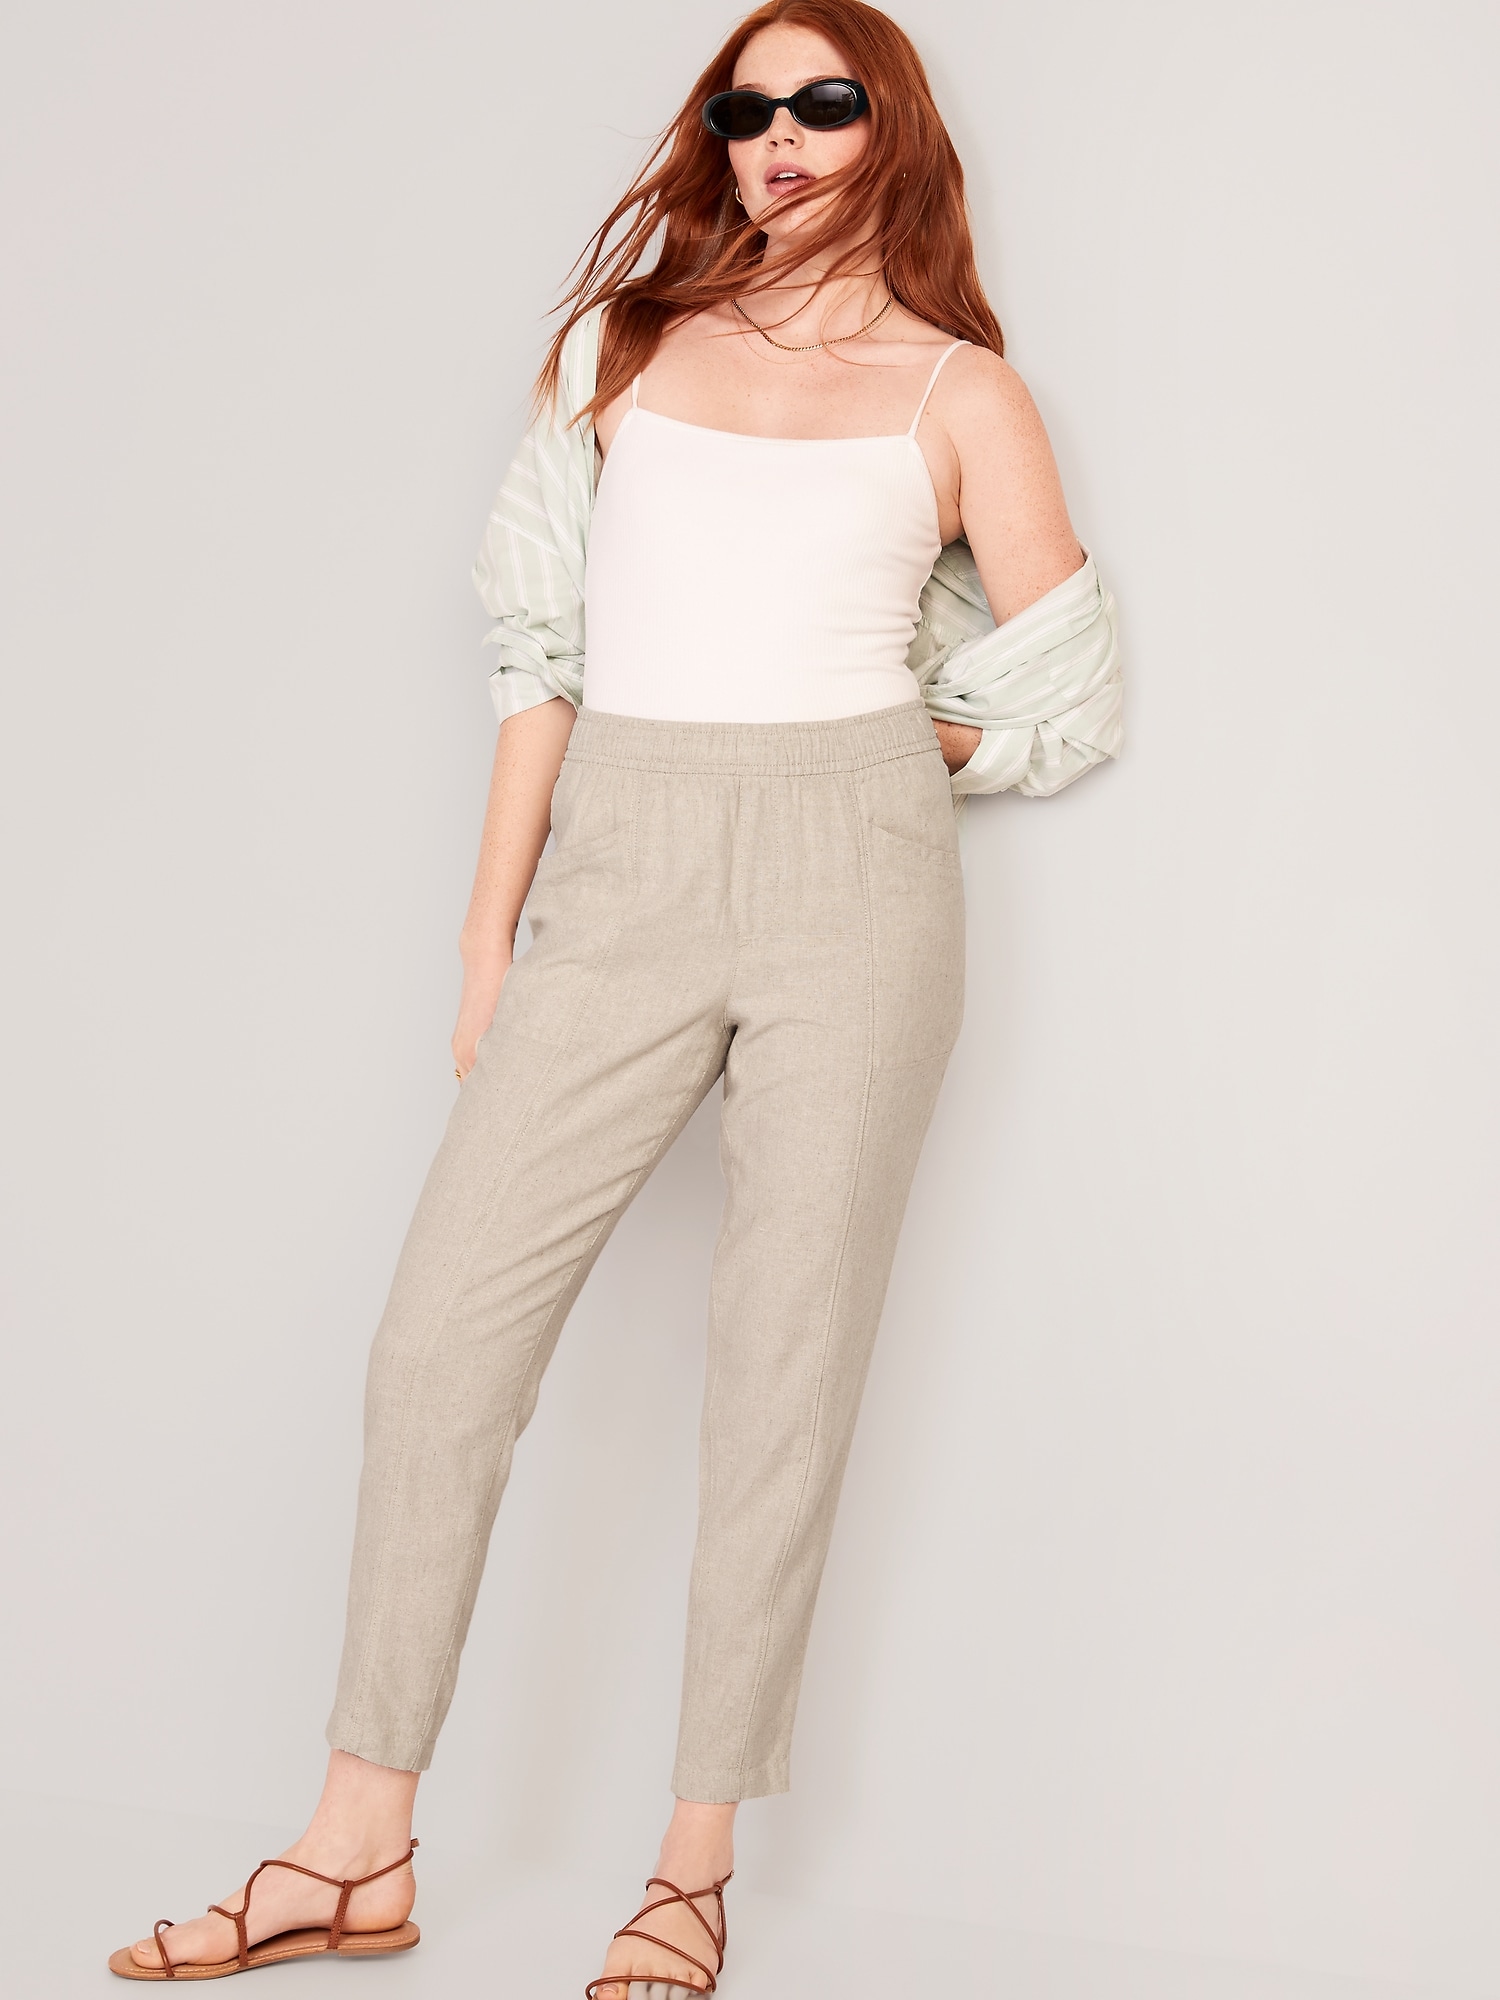 & OTHER STORIES Linen Blend Cropped Trousers in Khaki Stripe | Endource